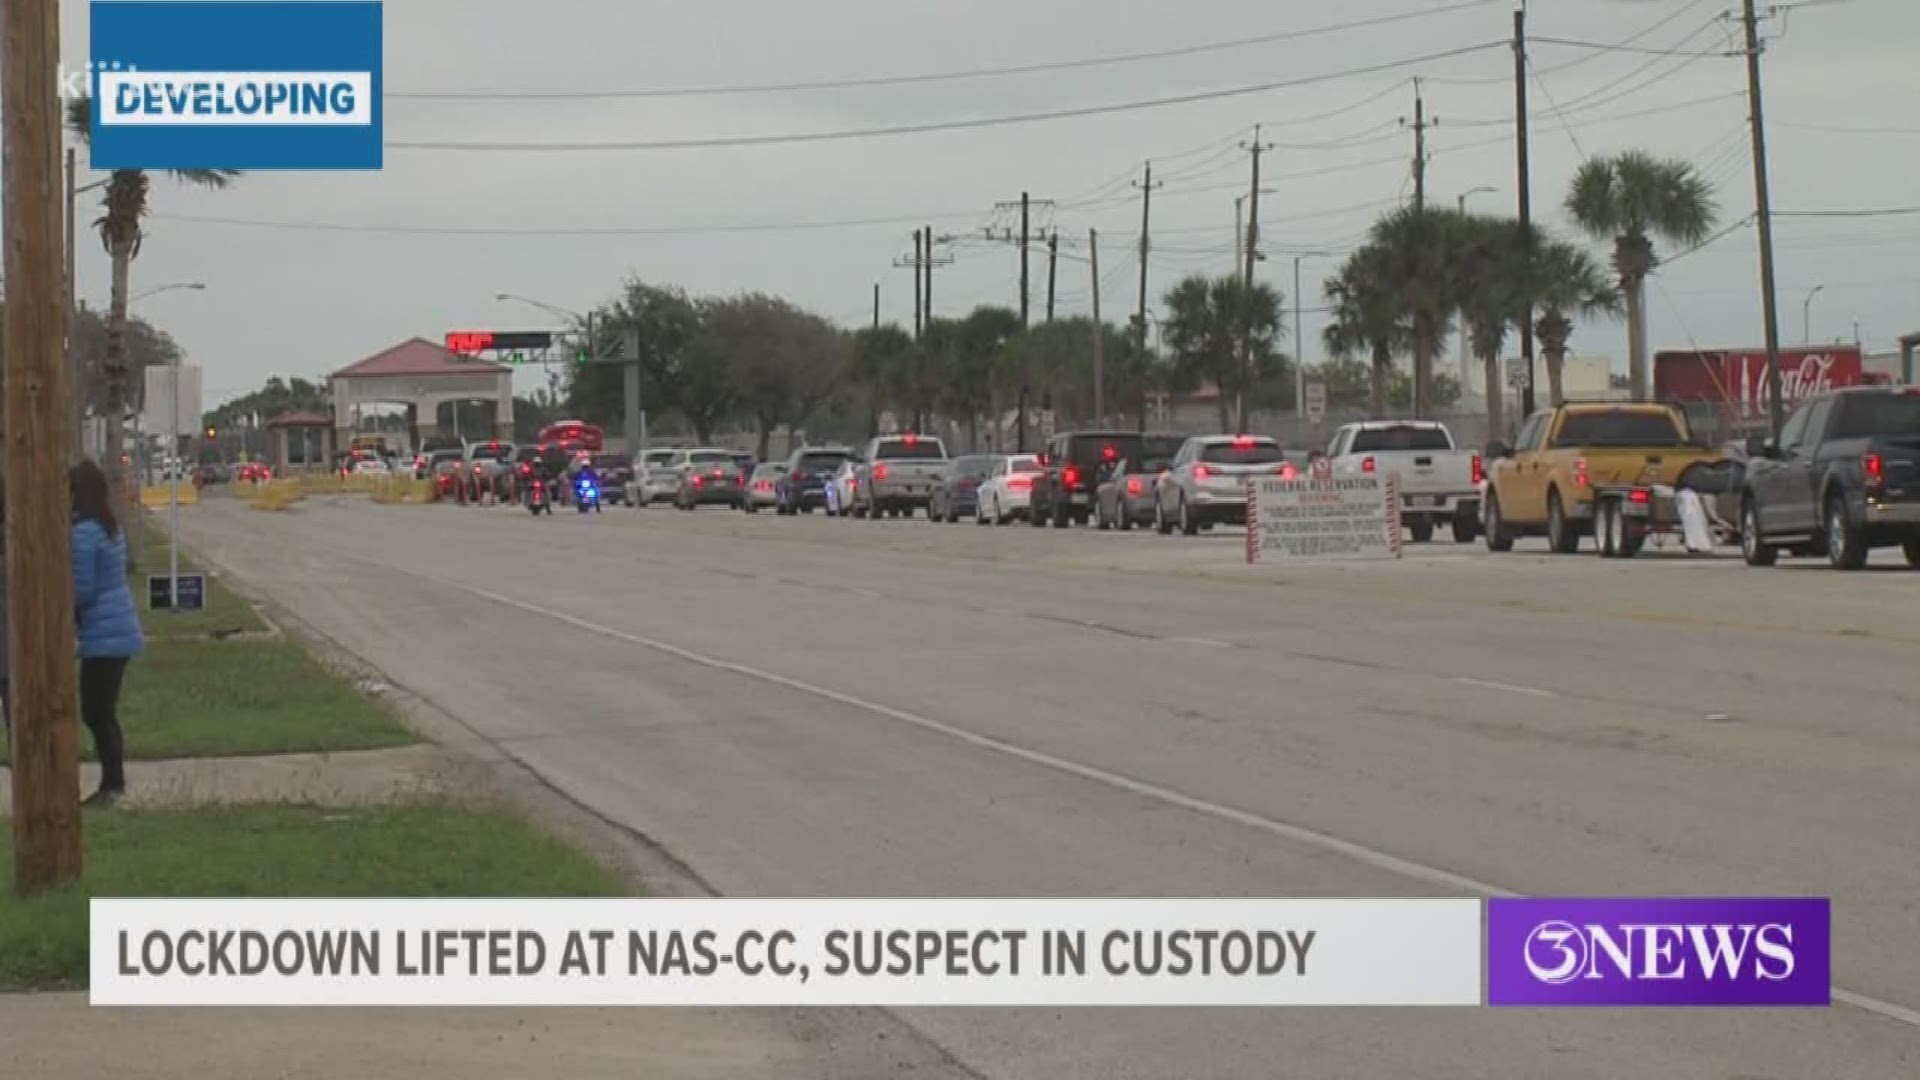 Naval Air Station-Corpus Christi was placed on lockdown early Tuesday morning with personnel being told to shelter in place.